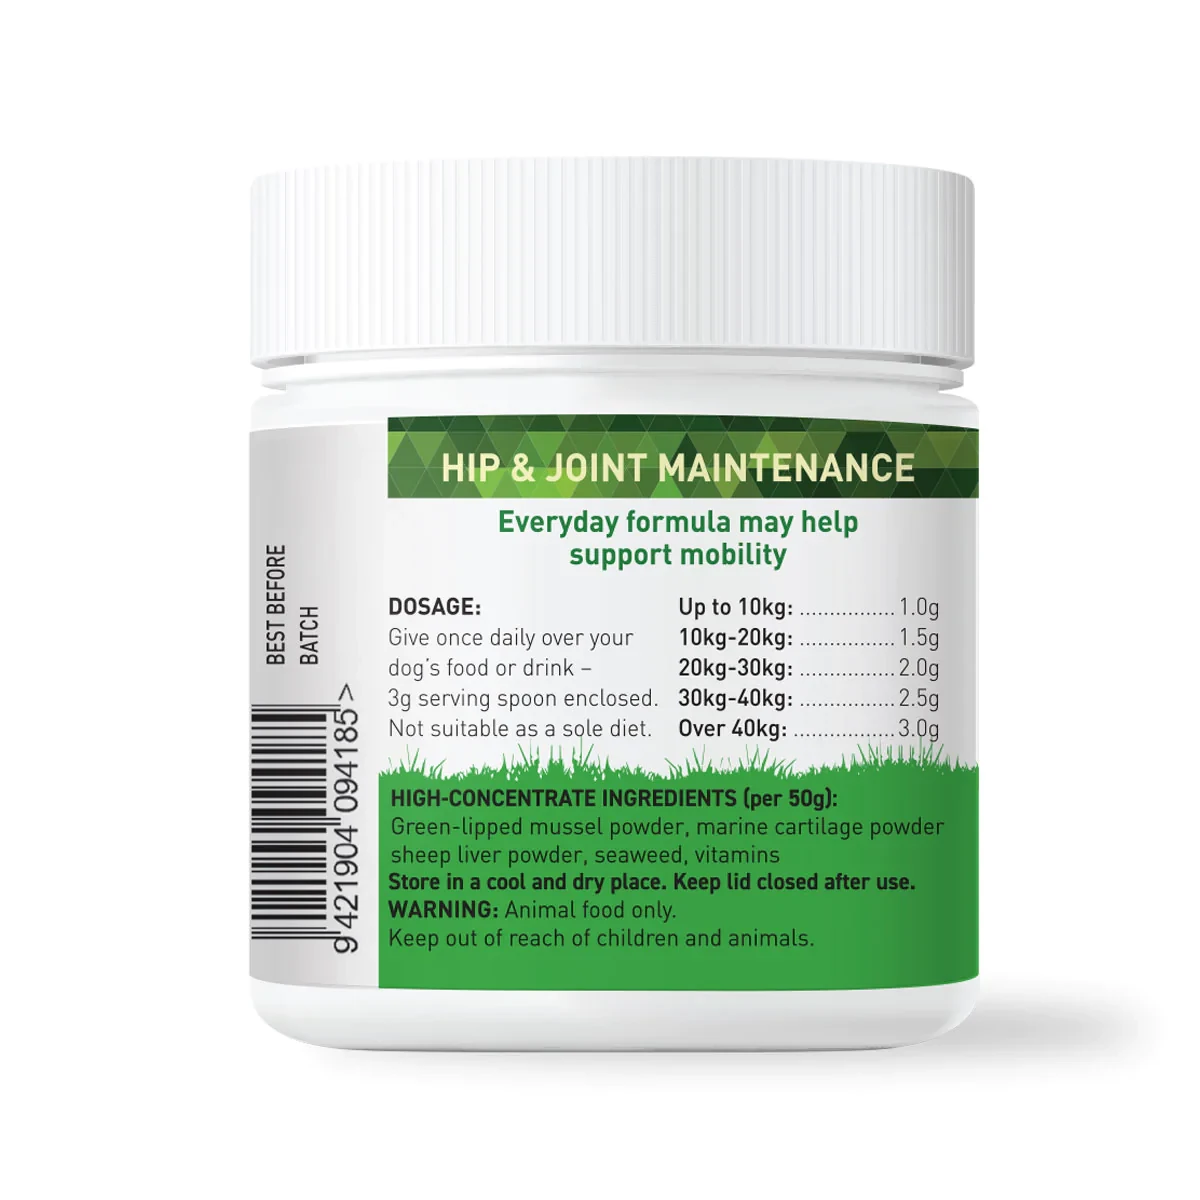 Hip & Joint powder for dogs